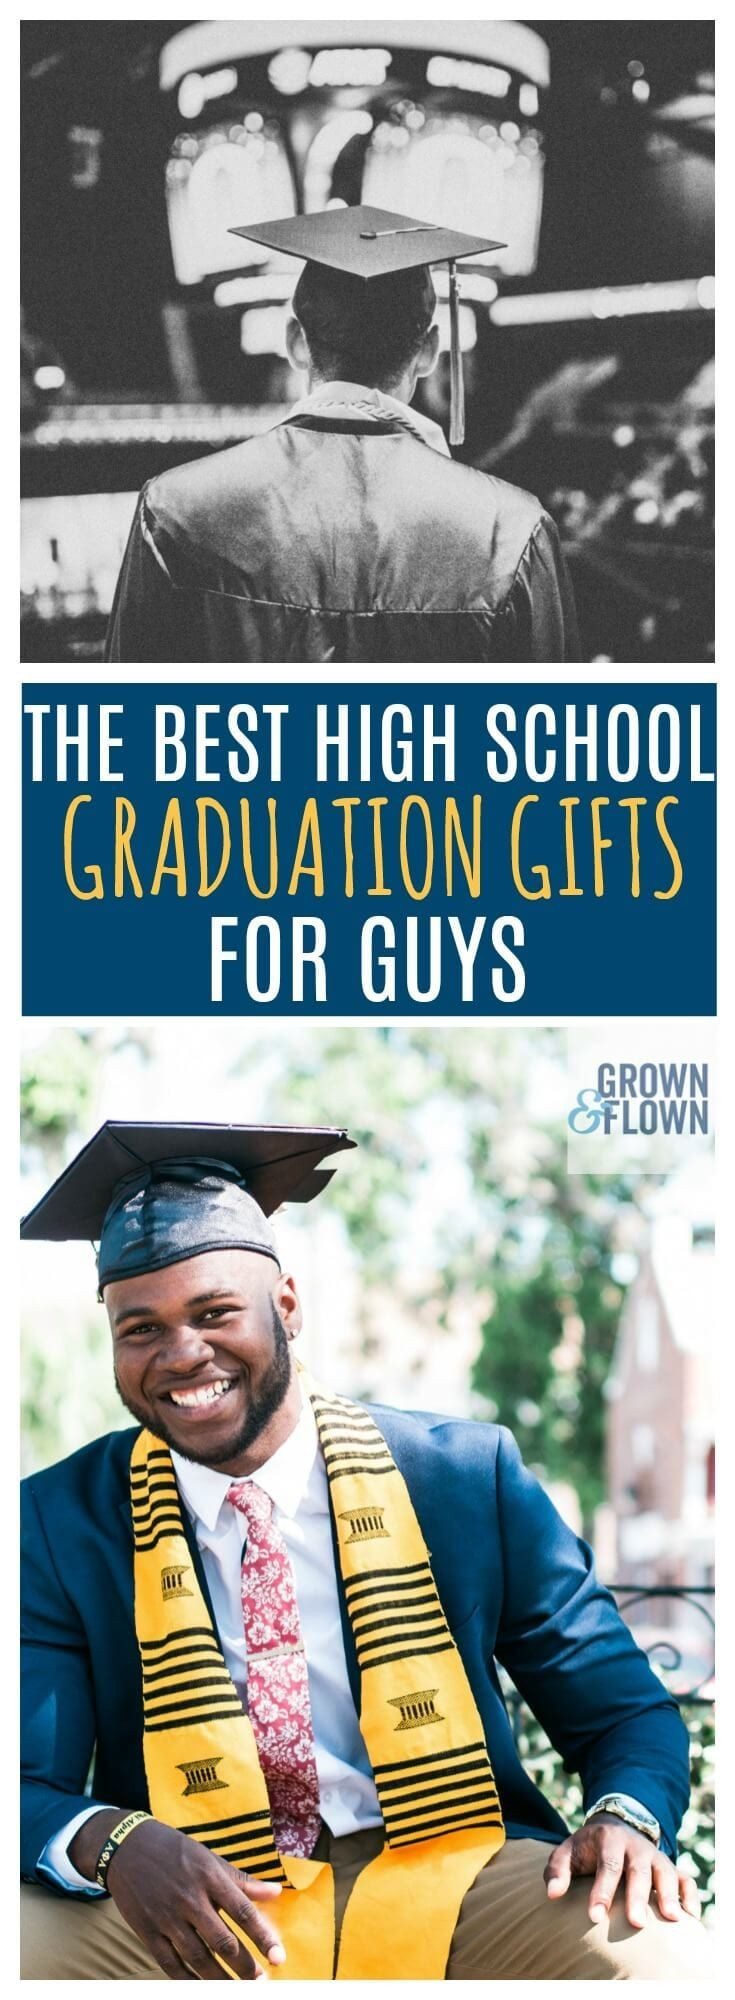 Graduation Gift Ideas For Male College Graduates
 2020 High School Graduation Gifts for Guys They Will Love